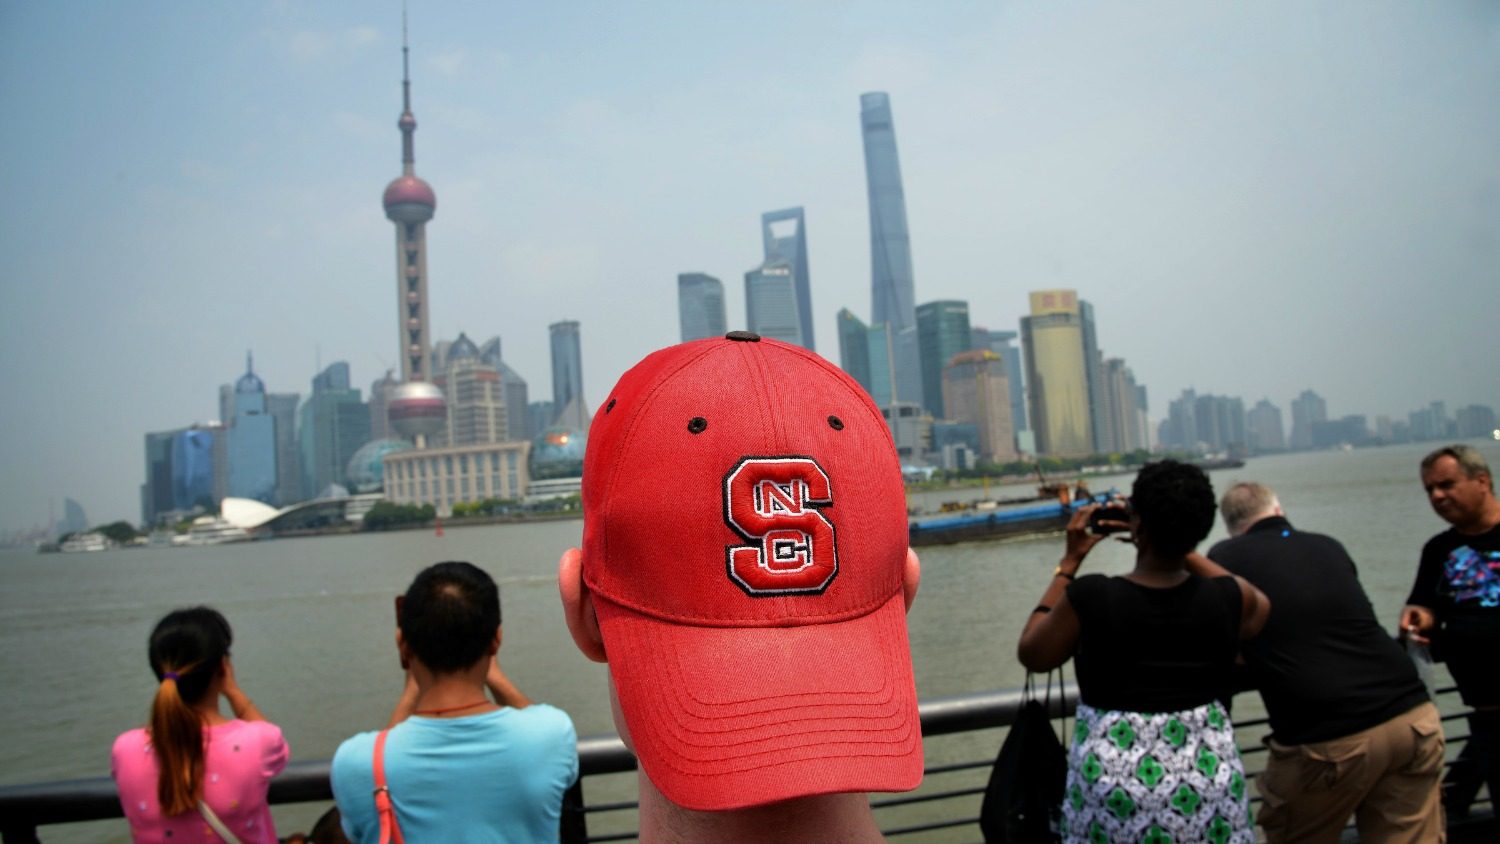 NC State’s Sean Lang sports his Wolfpack pride on his head while touring The Bund in Shanghai.